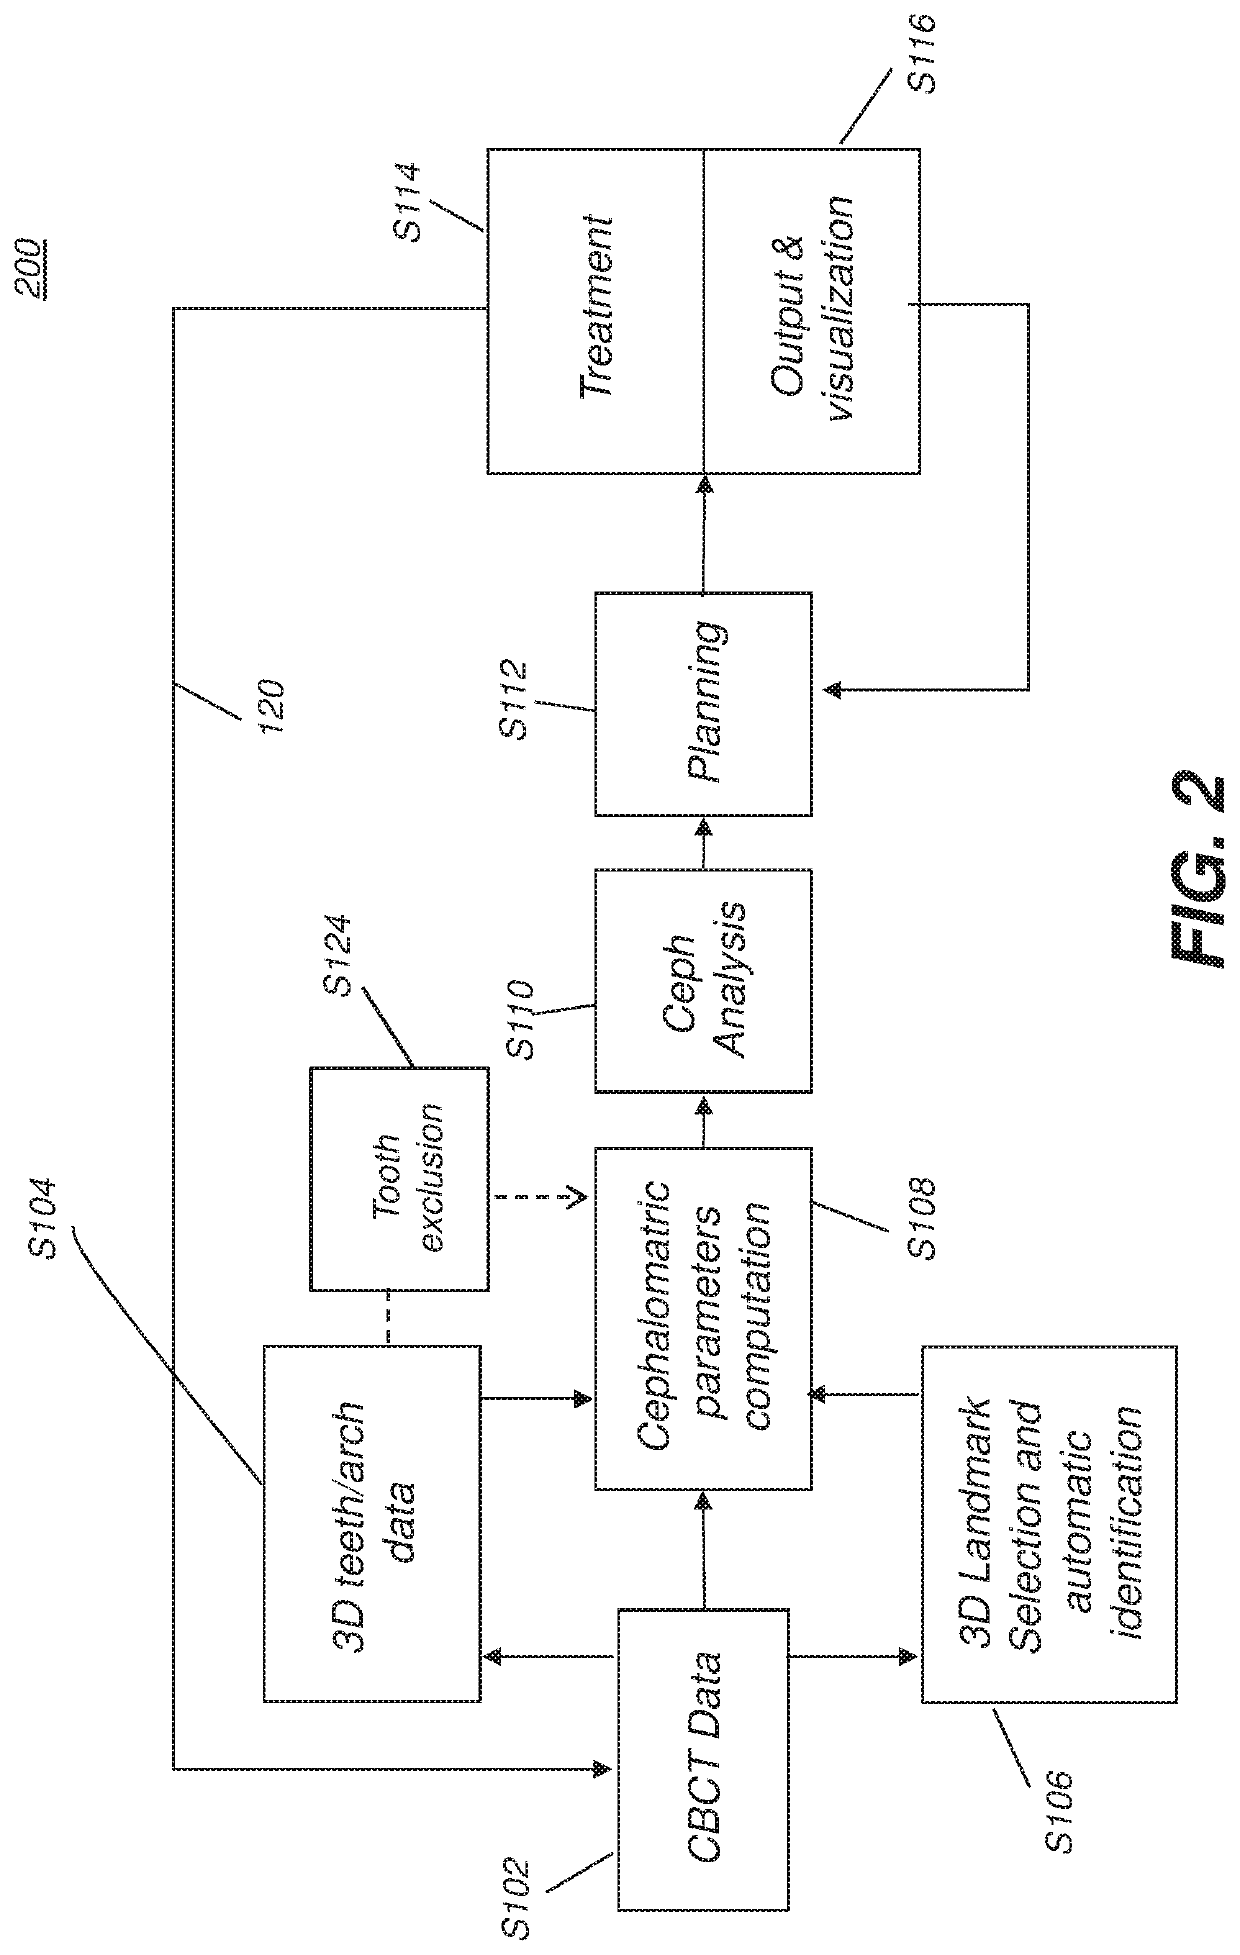 Method and System for 3D Cephalometric Analysis